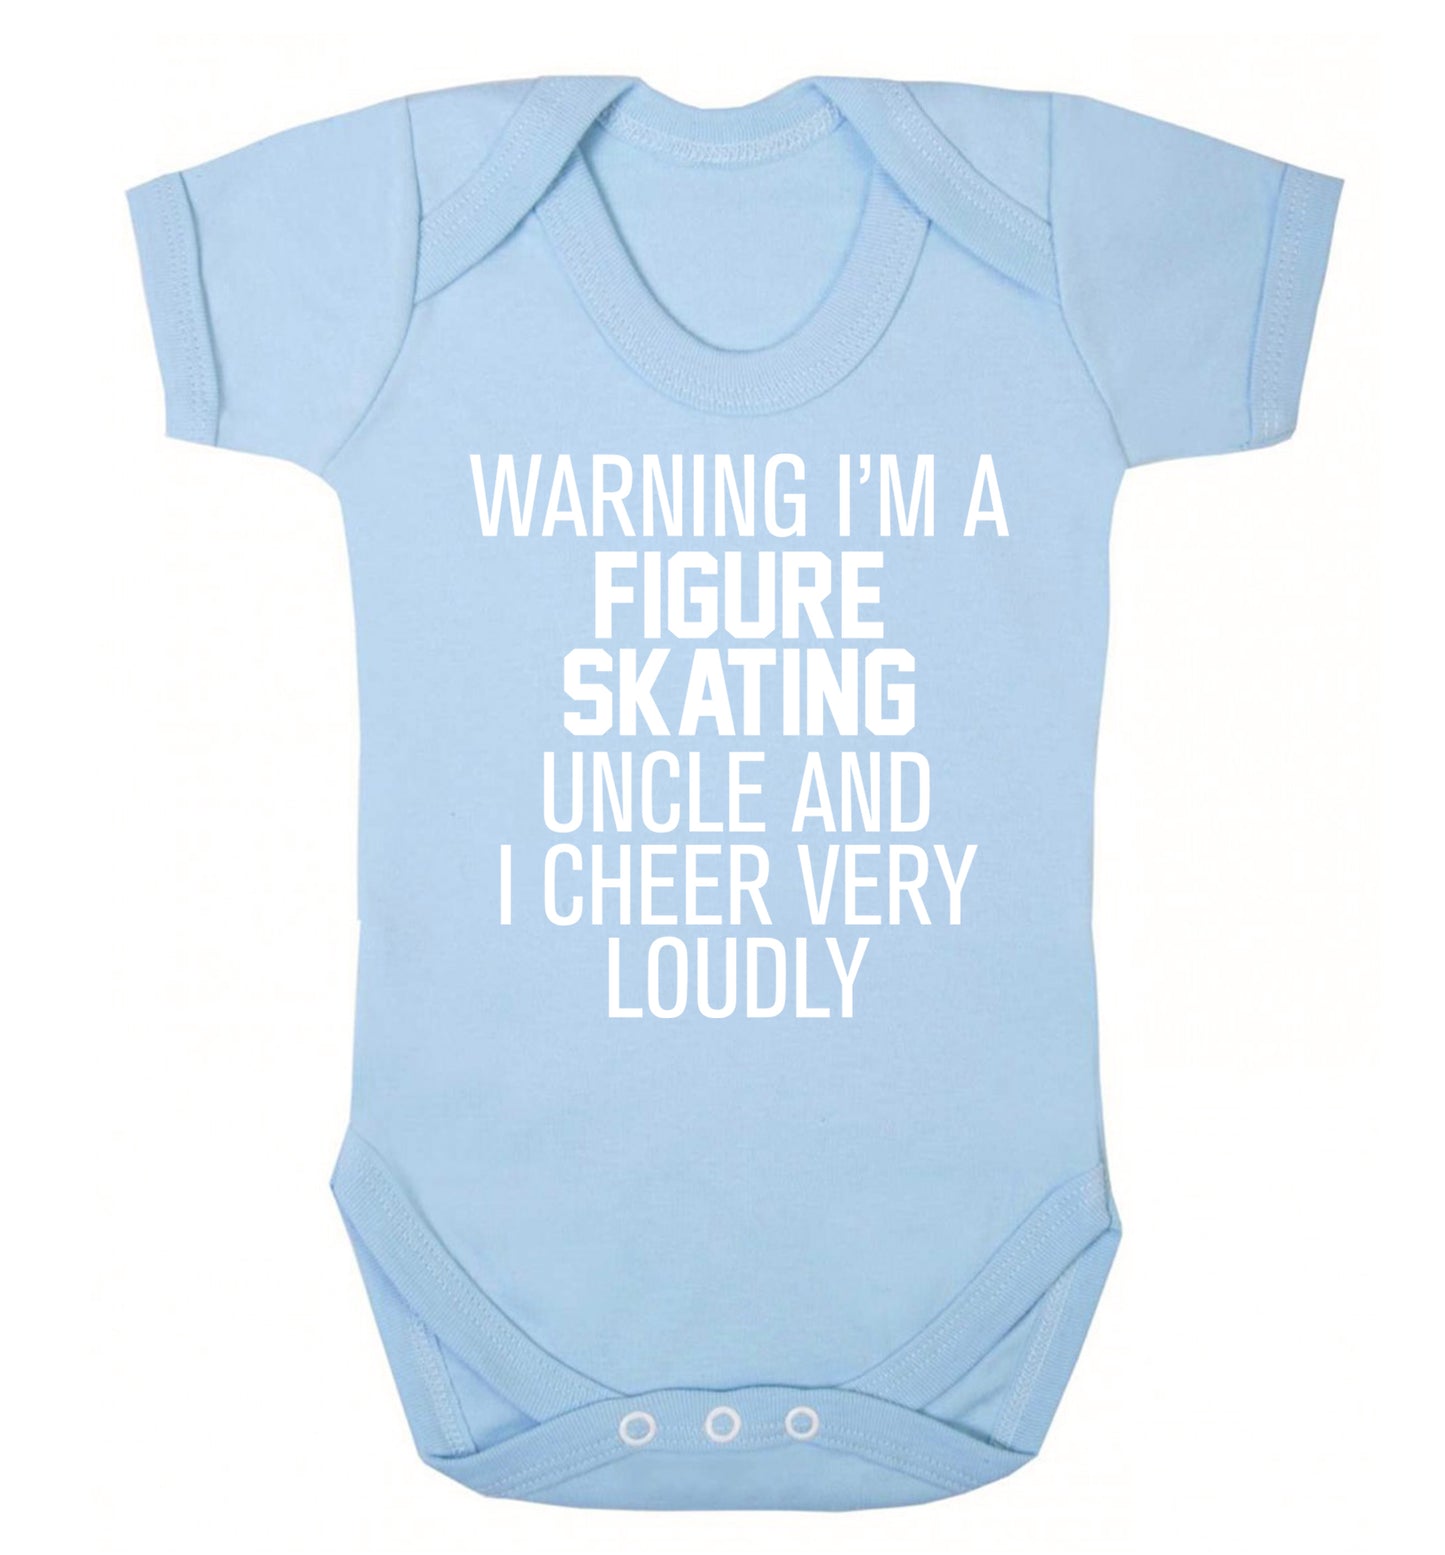 Warning I'm a figure skating uncle and I cheer very loudly Baby Vest pale blue 18-24 months